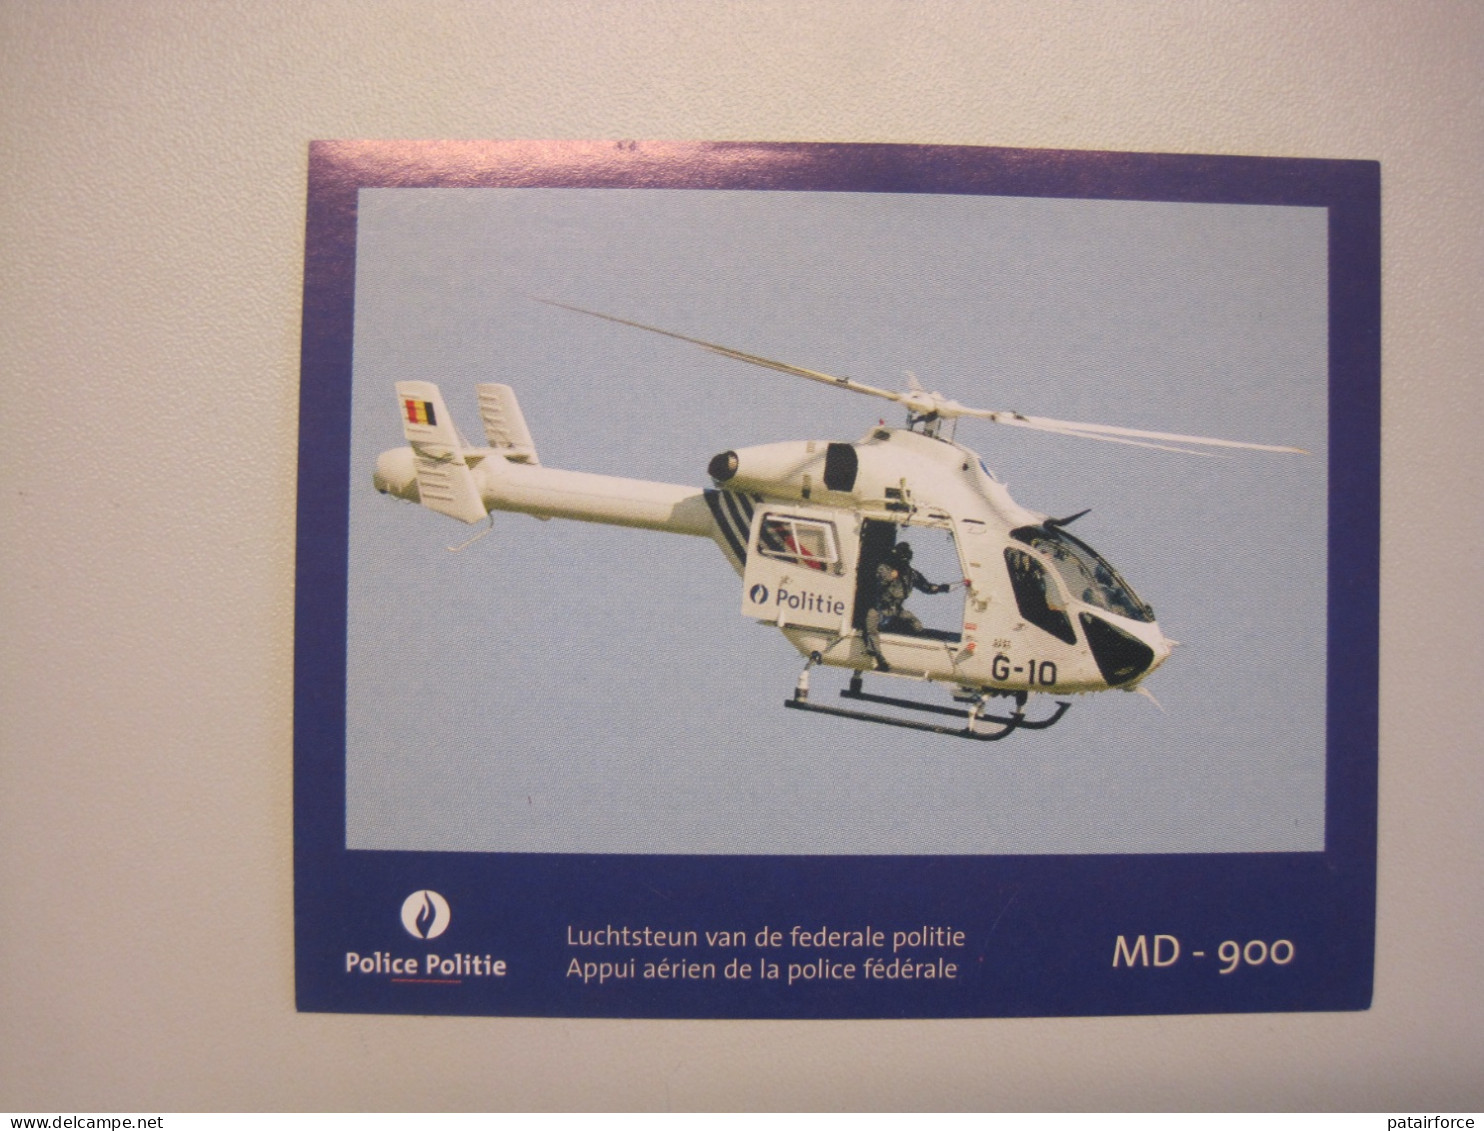 Sticker Helikopter Politie - Police MD900 Helico - Policia